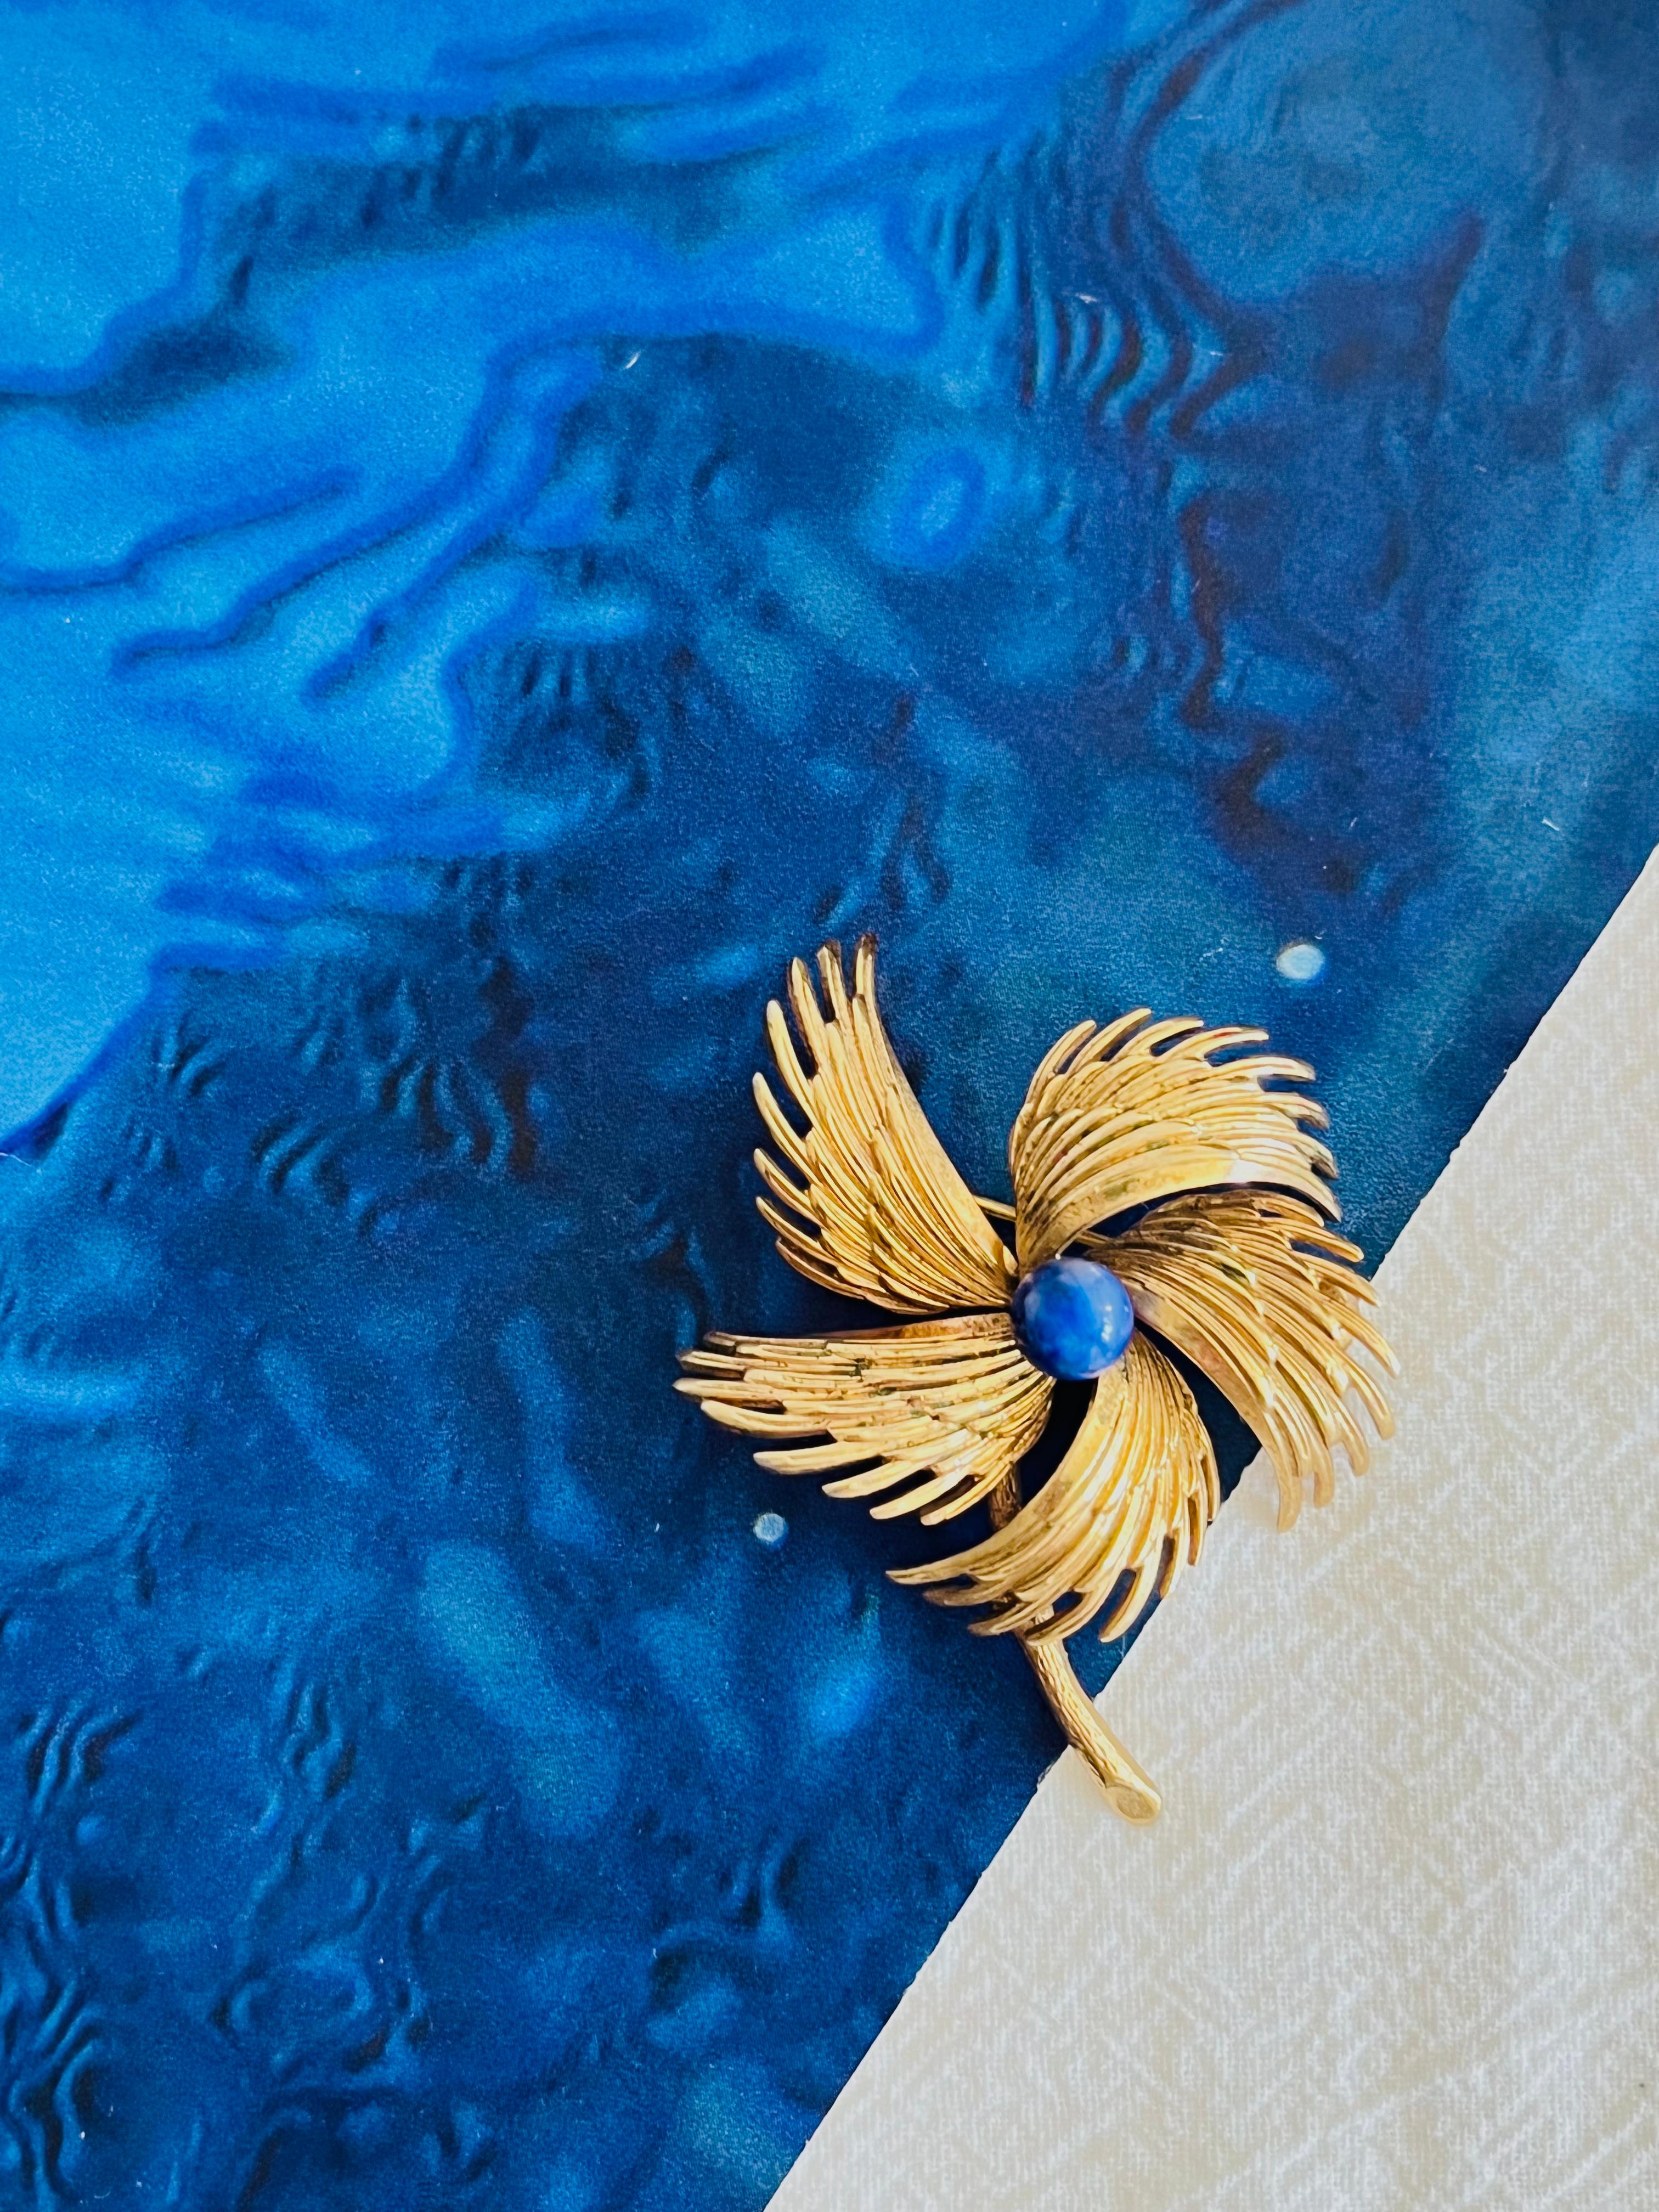 Christian Dior GROSSE 1967 Vintage Navy Wings Feather Flower Windmills Brooch, Gold Tone

Very good condition. Light scratches or colour loss, barely noticeable. 100% Genuine.

Safety-catch pin closure. Signed Grosse 1967 on the back.

Size: 4.5 cm